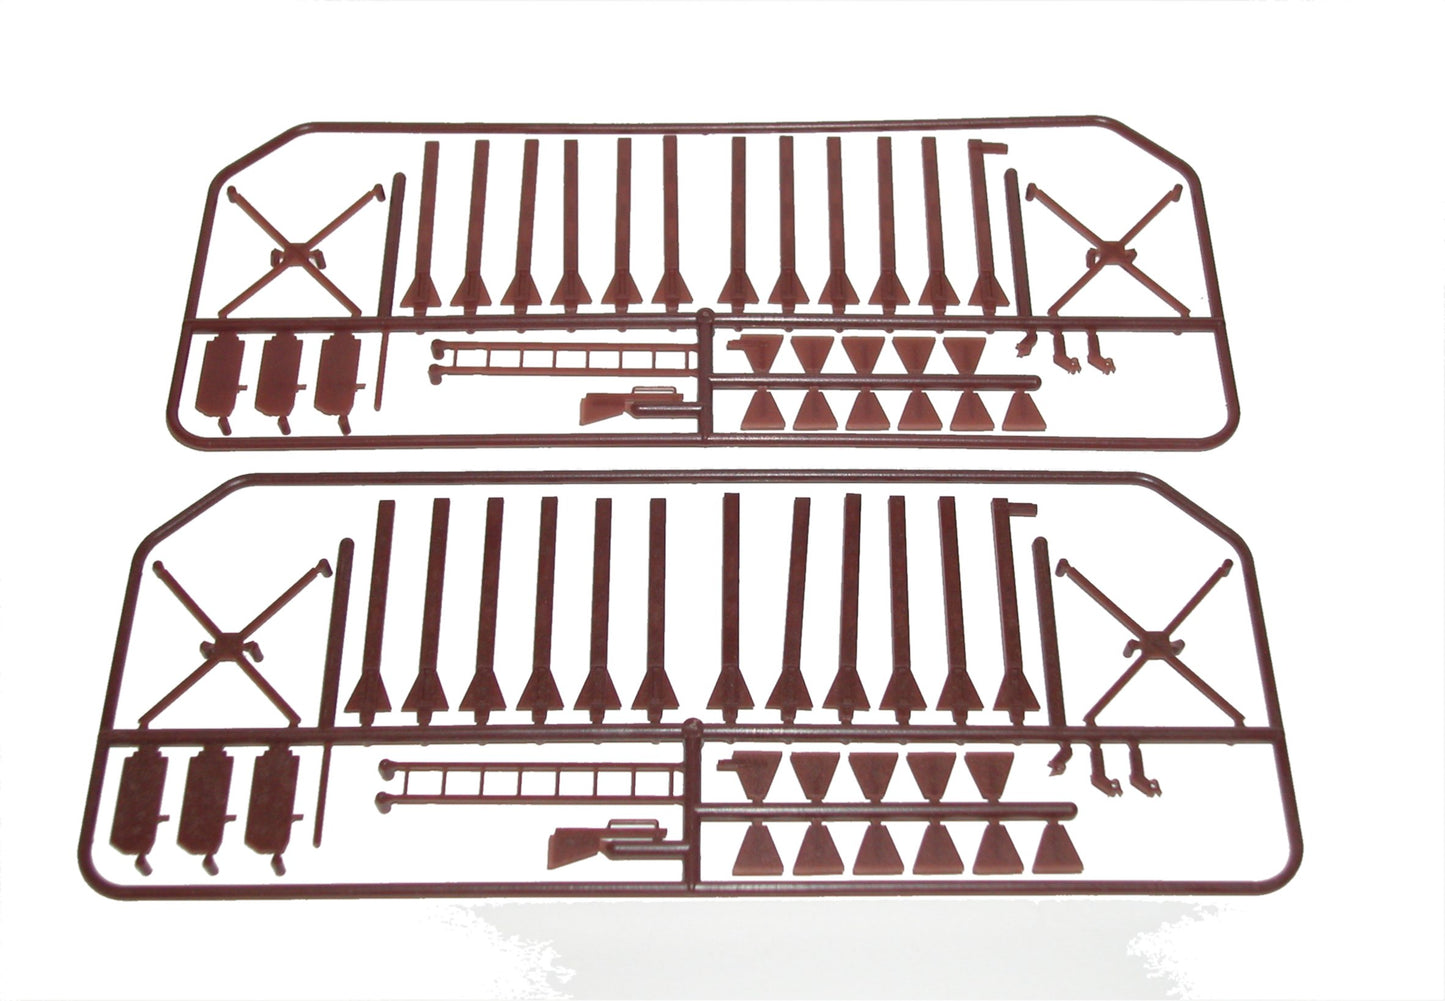 186 Auto Rack Detail Set (2) Mineral Red